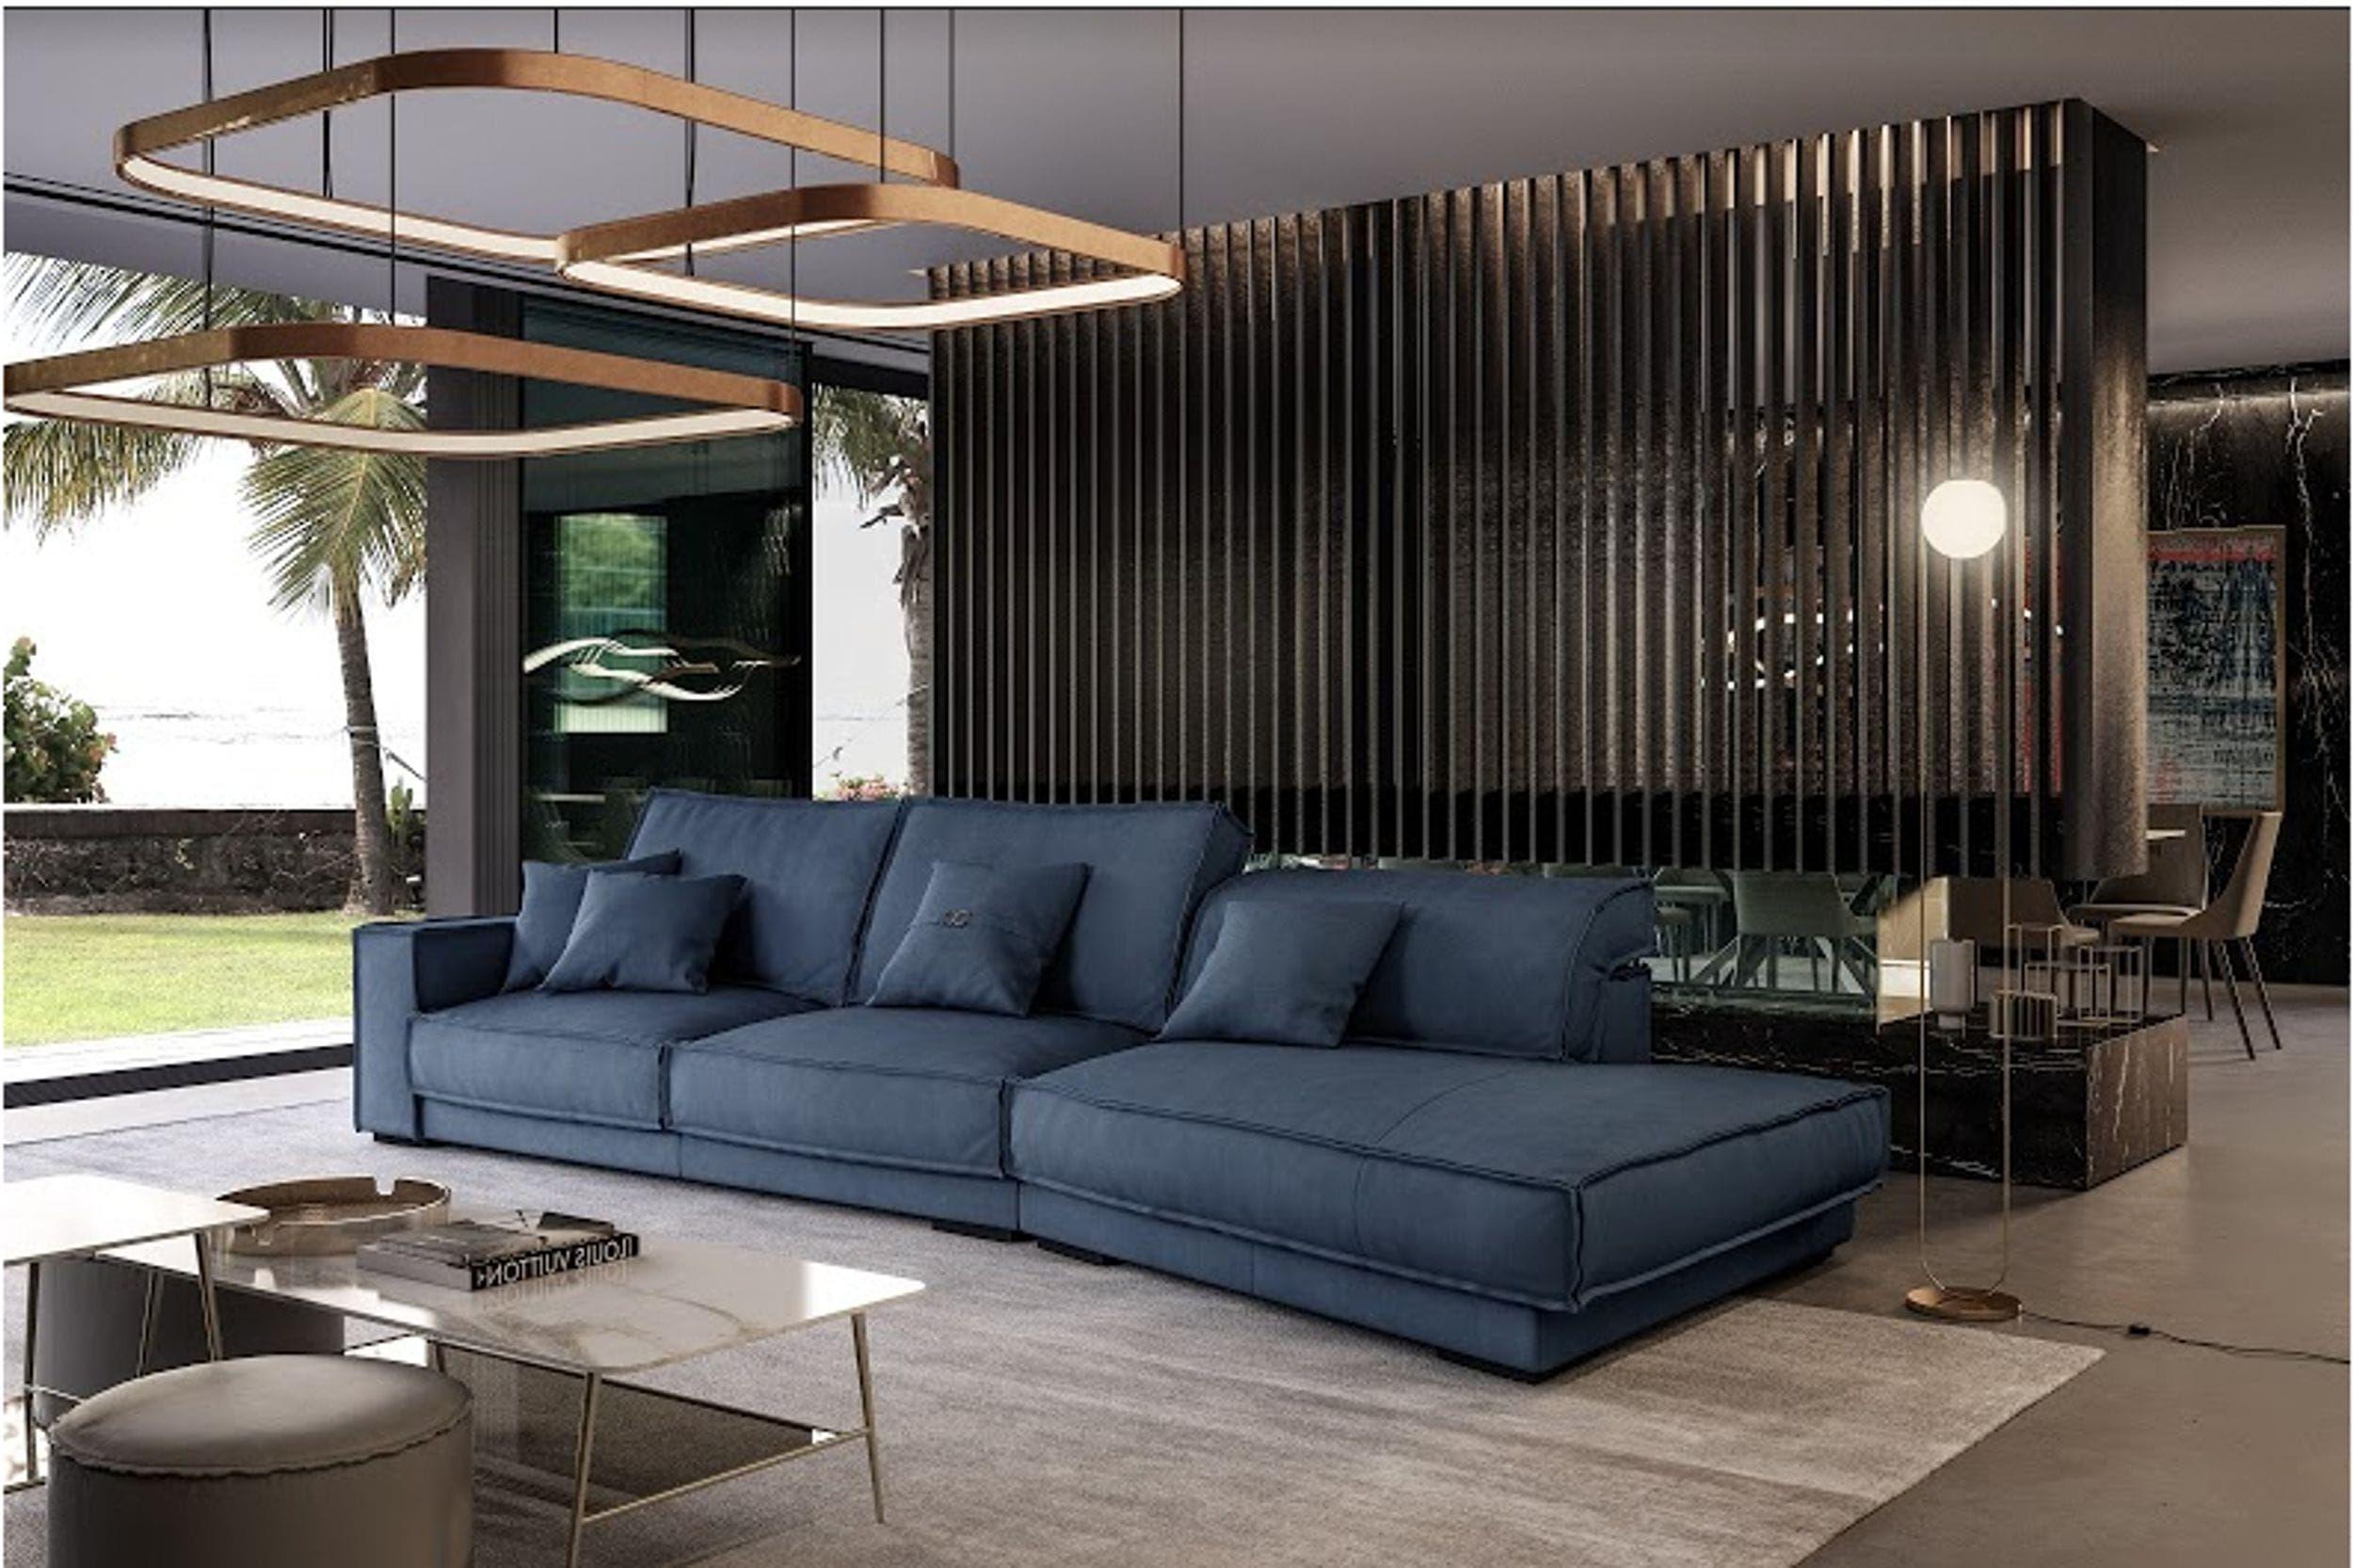 Contemporary, Modern Sectional Sofa VGCCBAXTER-BLUE-RAF-SECT VGCCBAXTER-BLUE-RAF-SECT in Blue Italian Leather